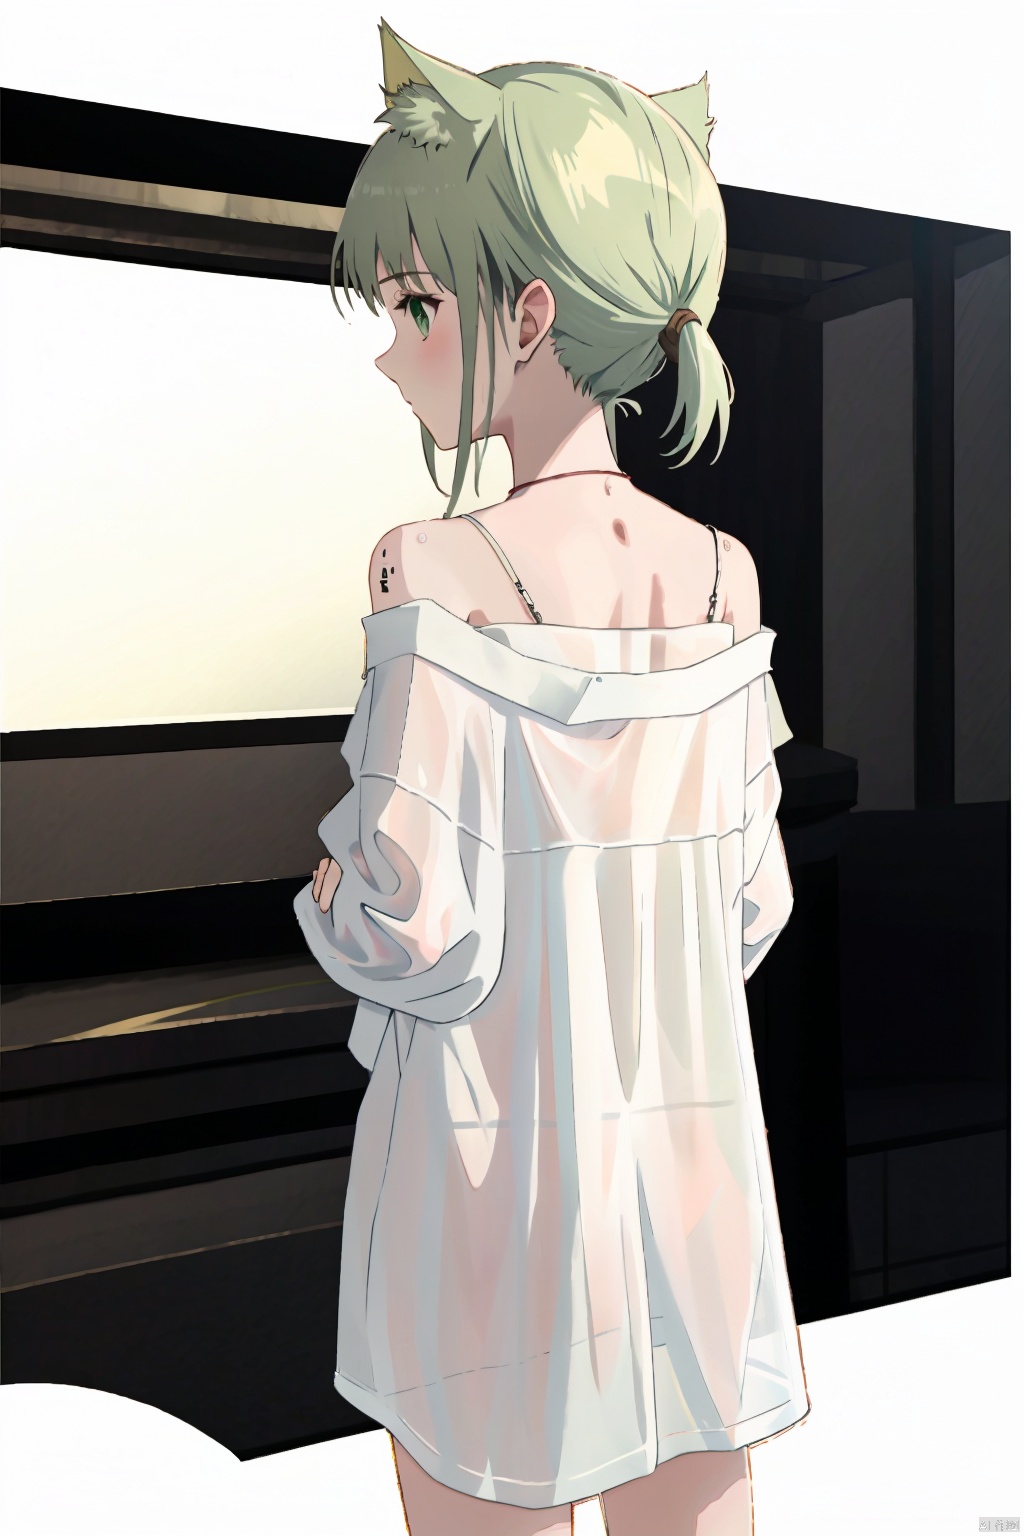  1 girl, focused, solo, looking back, looking from behind, half fallen clothes, shirt, white background, white shirt, looking at the audience, green eyes, boyfriend, comfortable anime, perspective wet T-shirt, soft, hair tied, hair tied, perfect fingers, ((poakl)), phSaber,kaldef